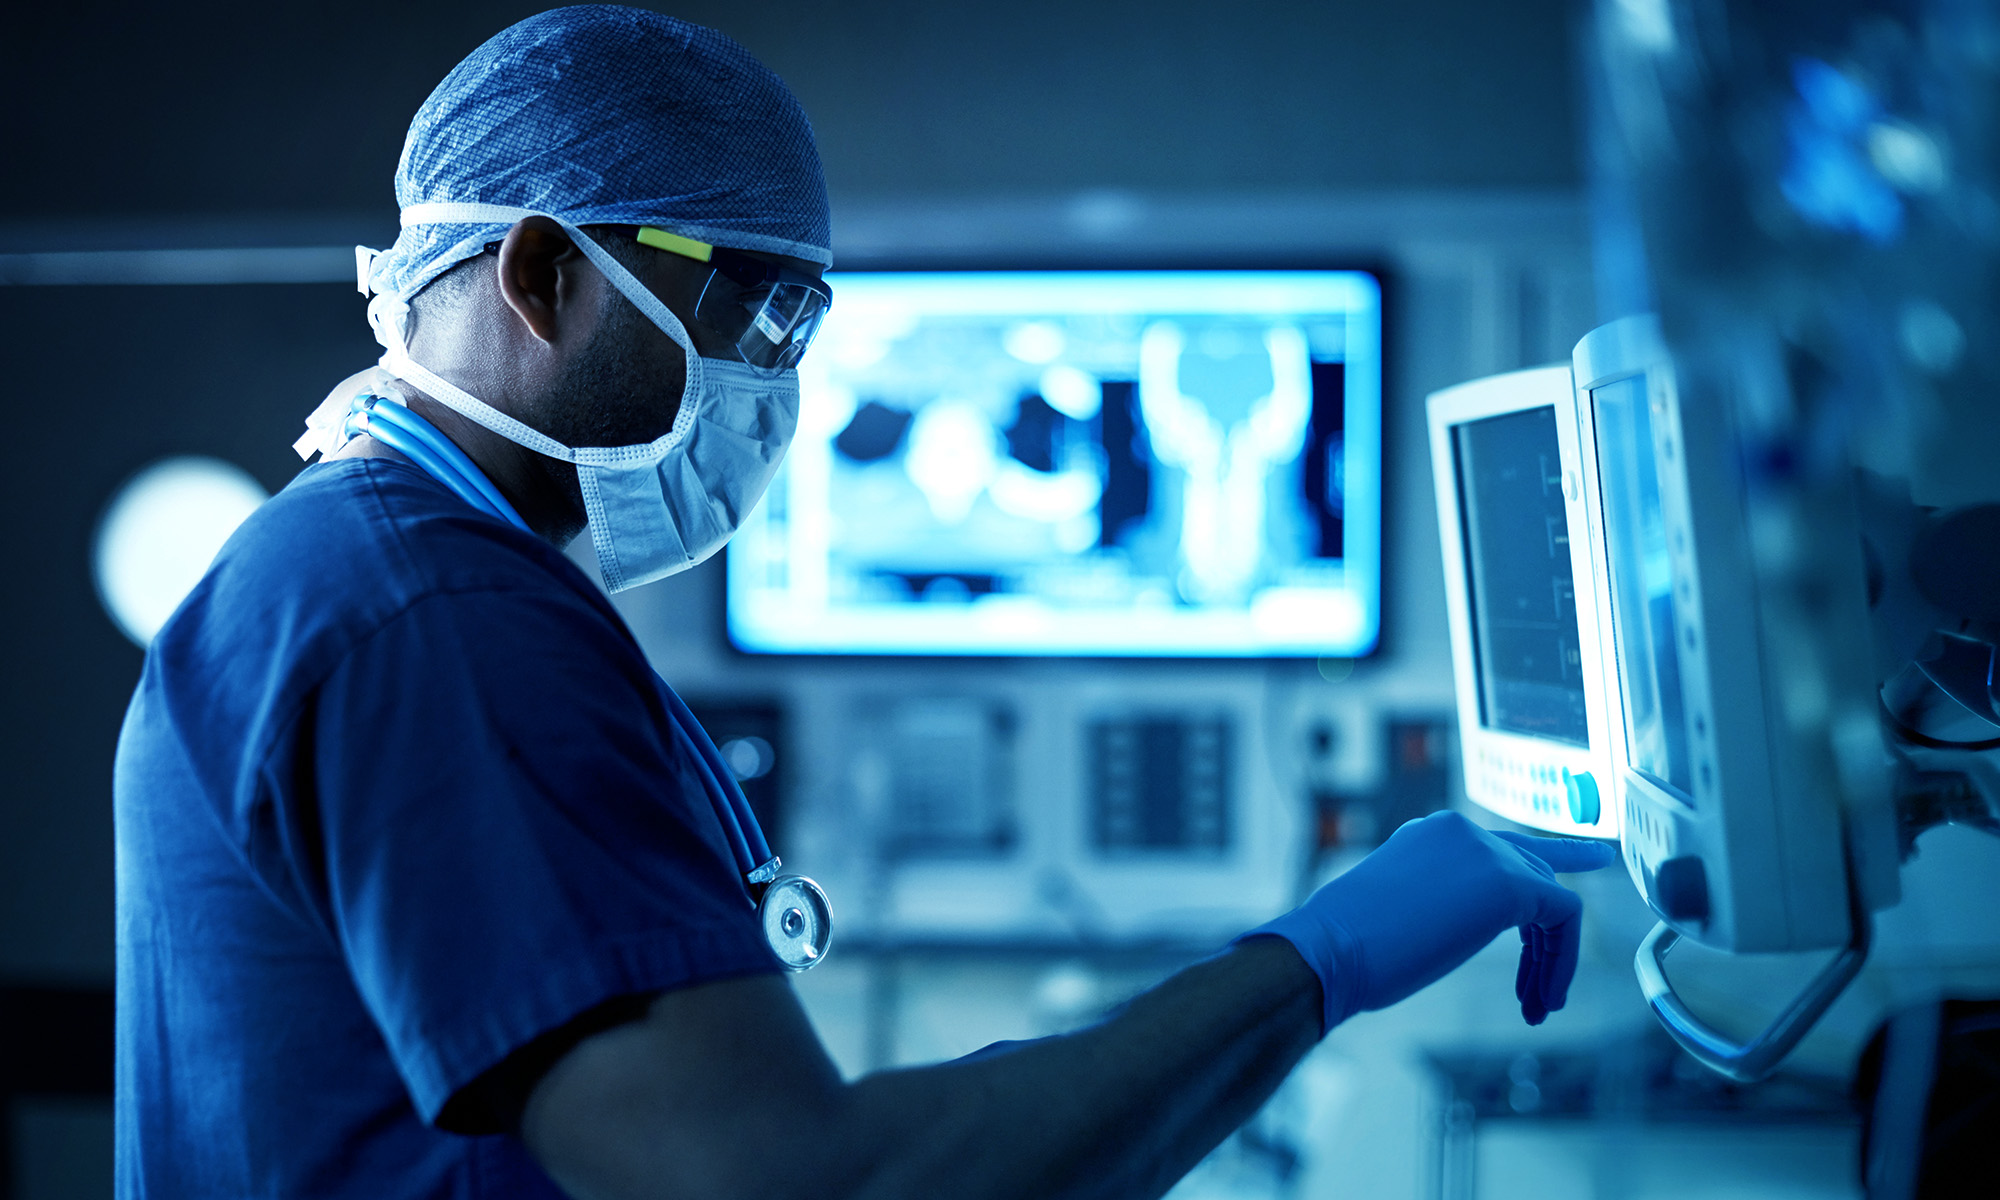 Why Interventional Radiology?